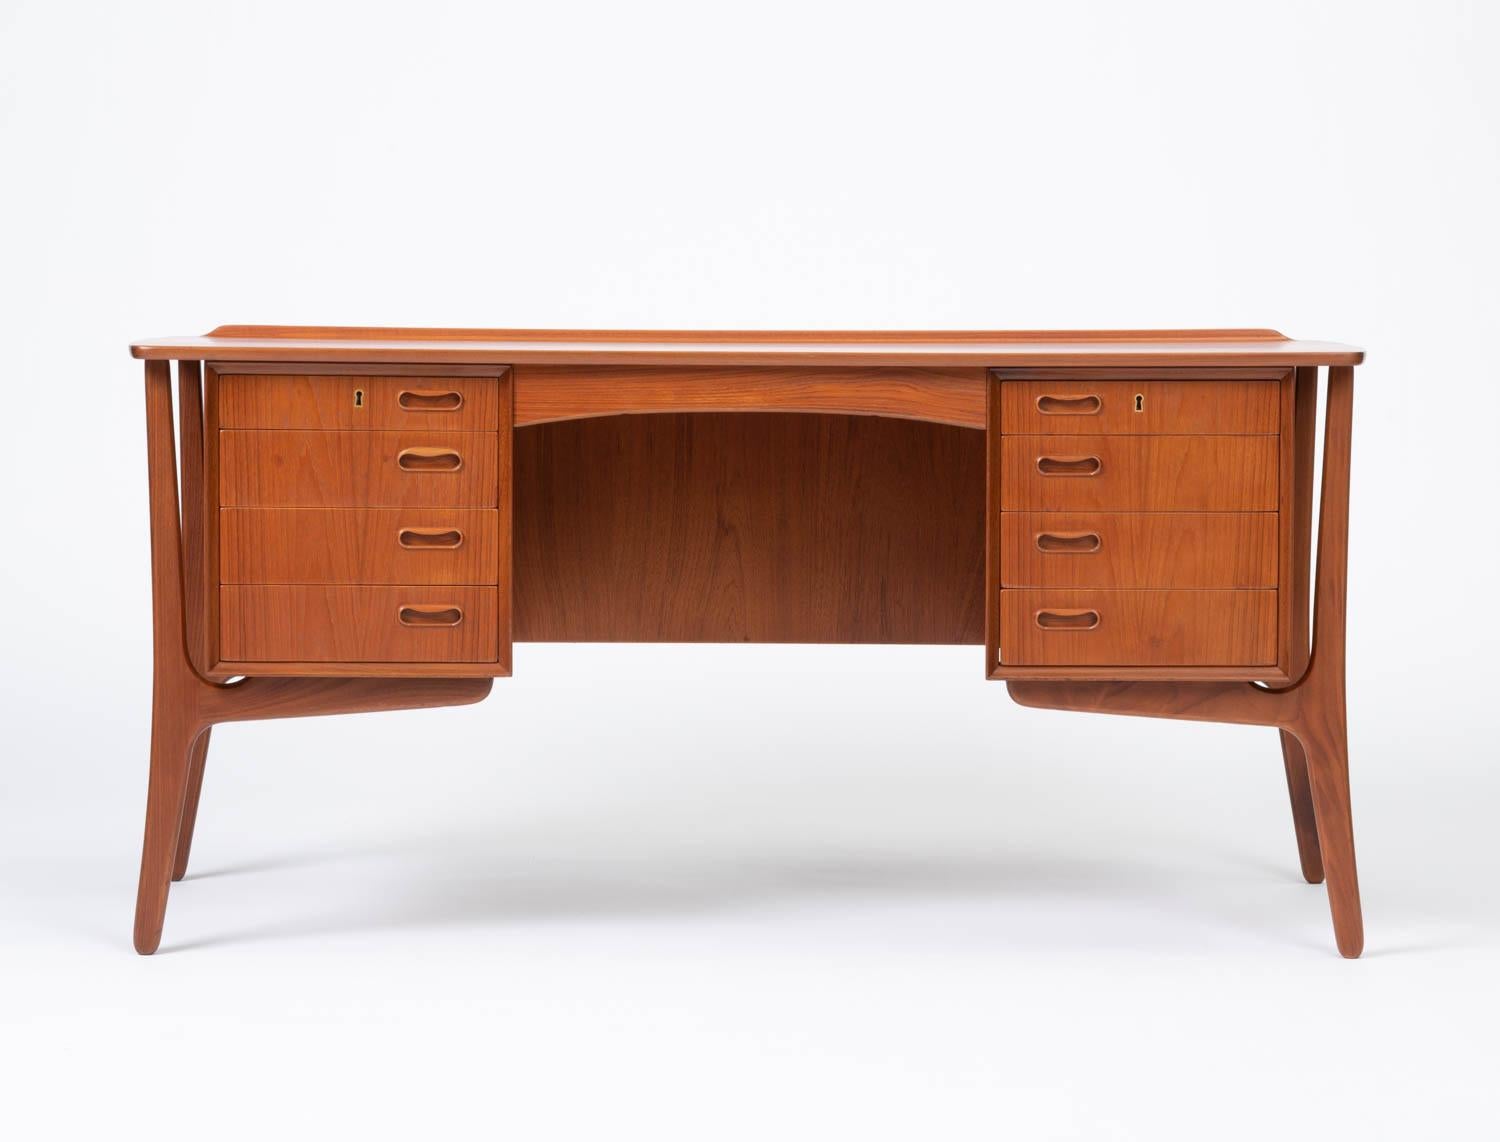 Classic Danish teak executive desk with twin drawer stacks and a broad writing surface. This piece, designed by Svend Åage Madsen for H.P. Hansen's Møbelindustri is distinguished by the bookcase that runs lengthwise along its back panel and the